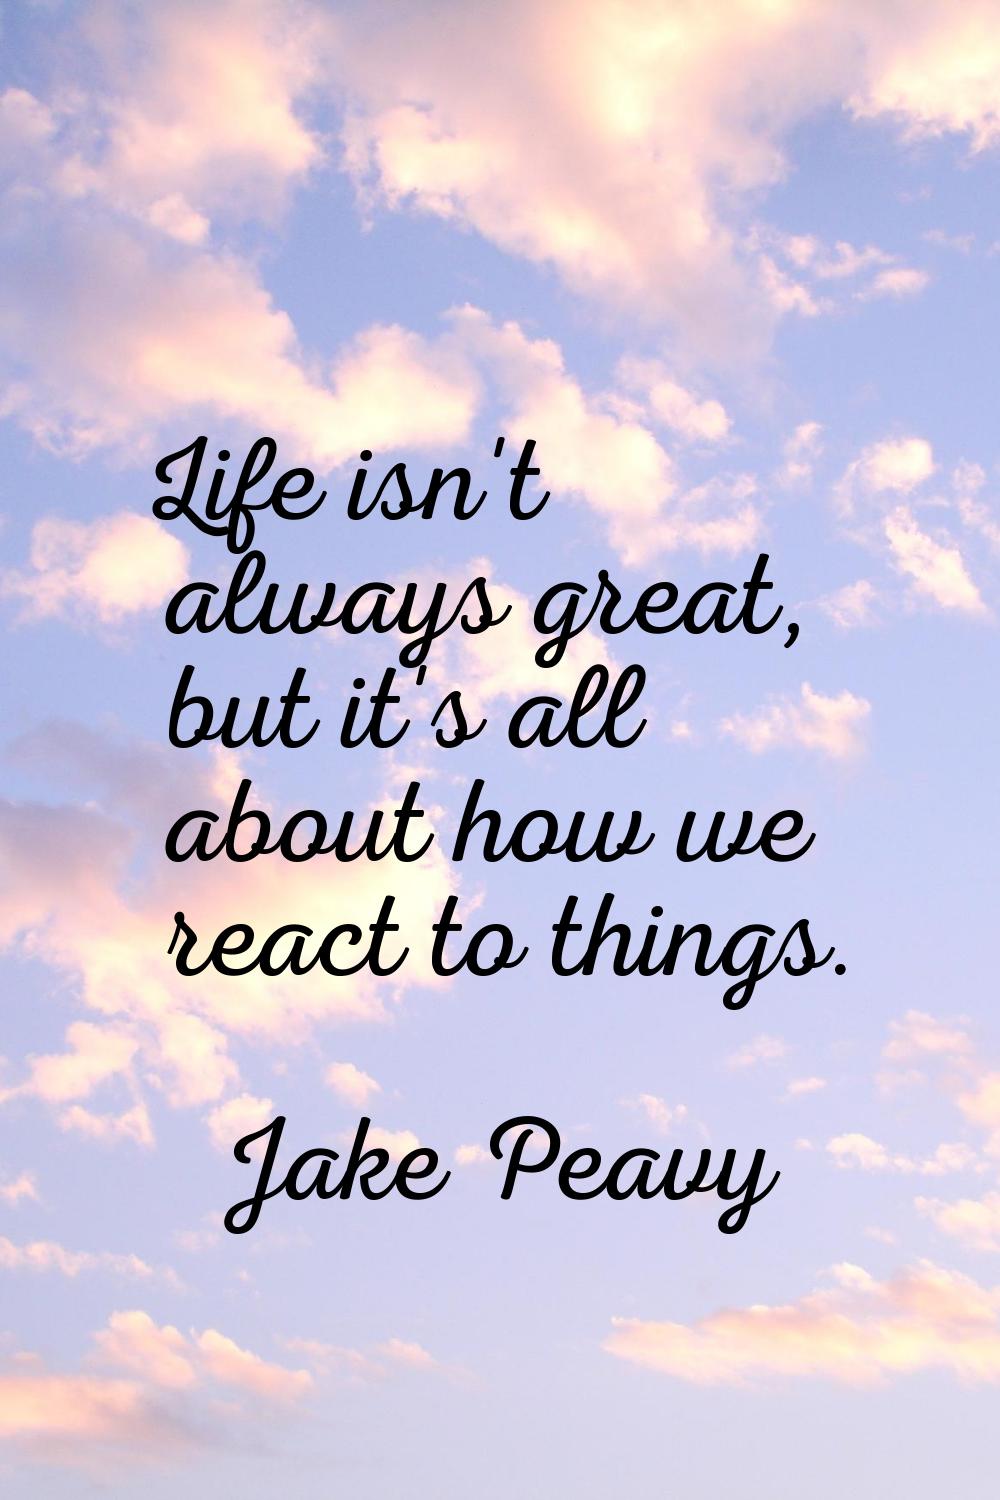 Life isn't always great, but it's all about how we react to things.